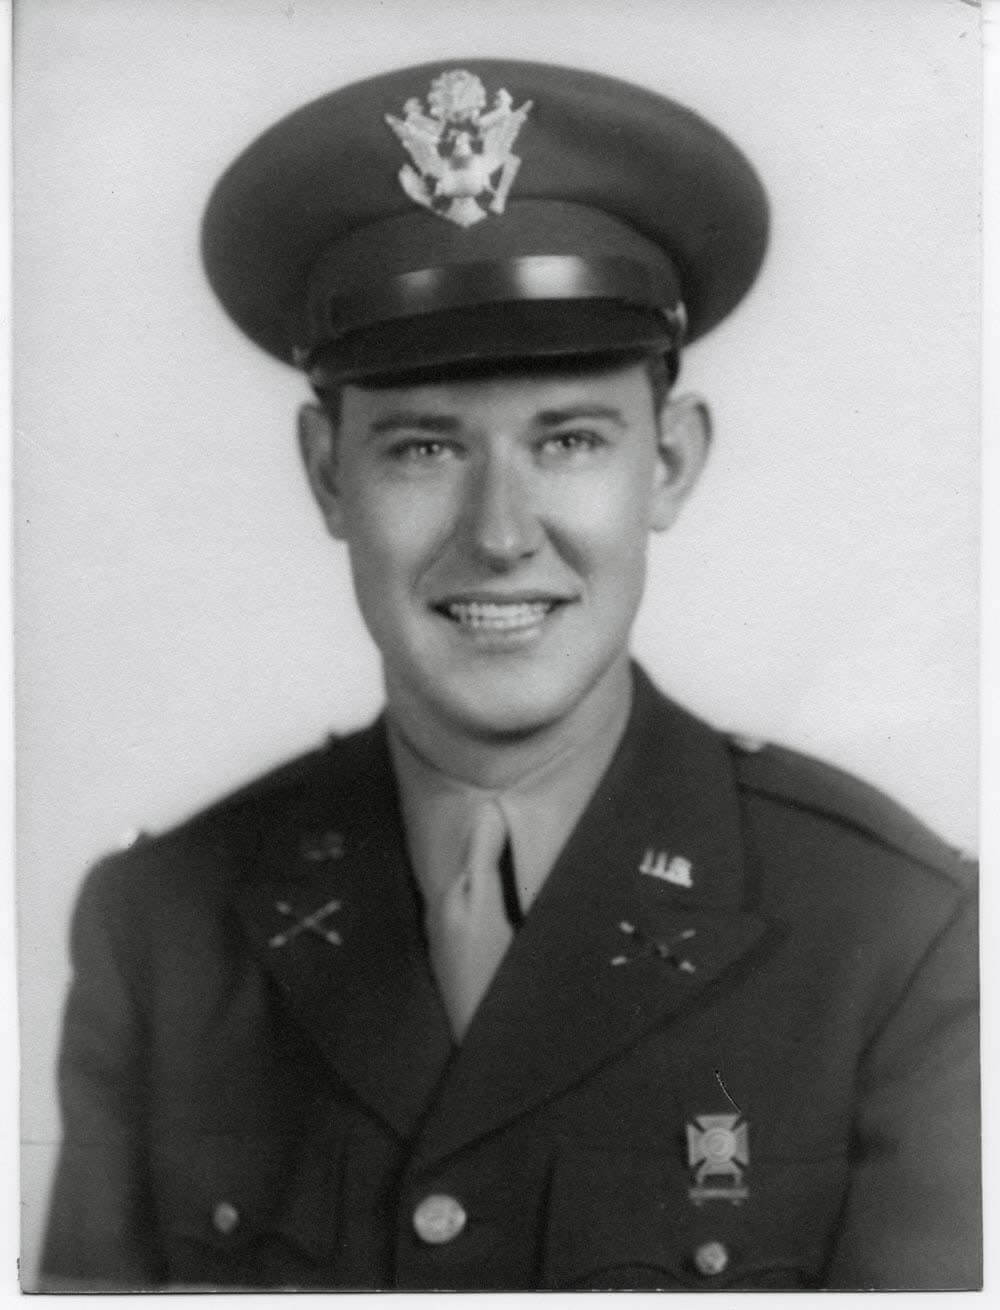 Don, US Army, 2nd Lt